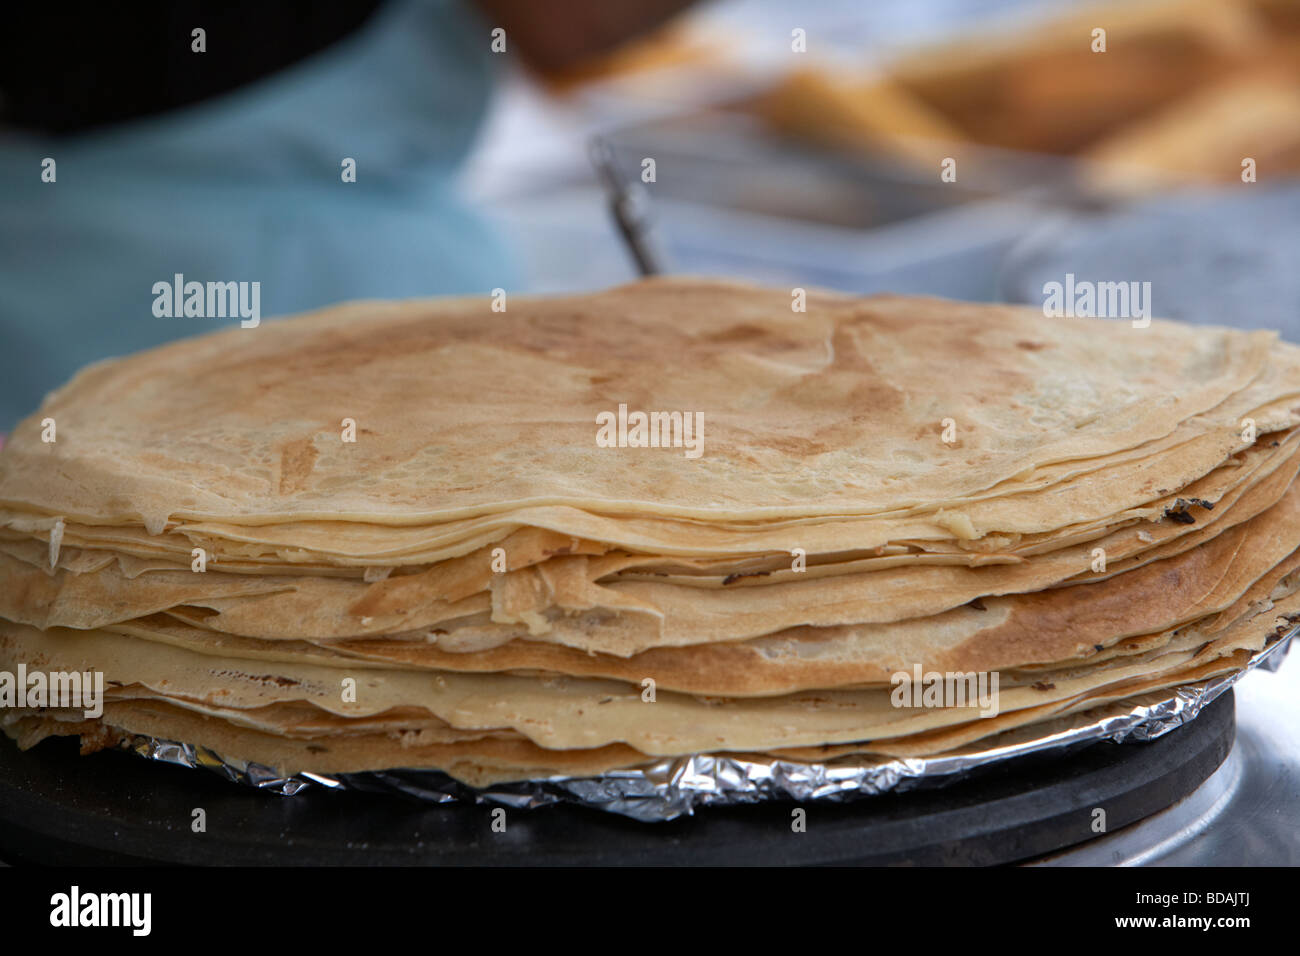 pile of crepes warming on a food stall at an outdoor food market in the uk Stock Photo